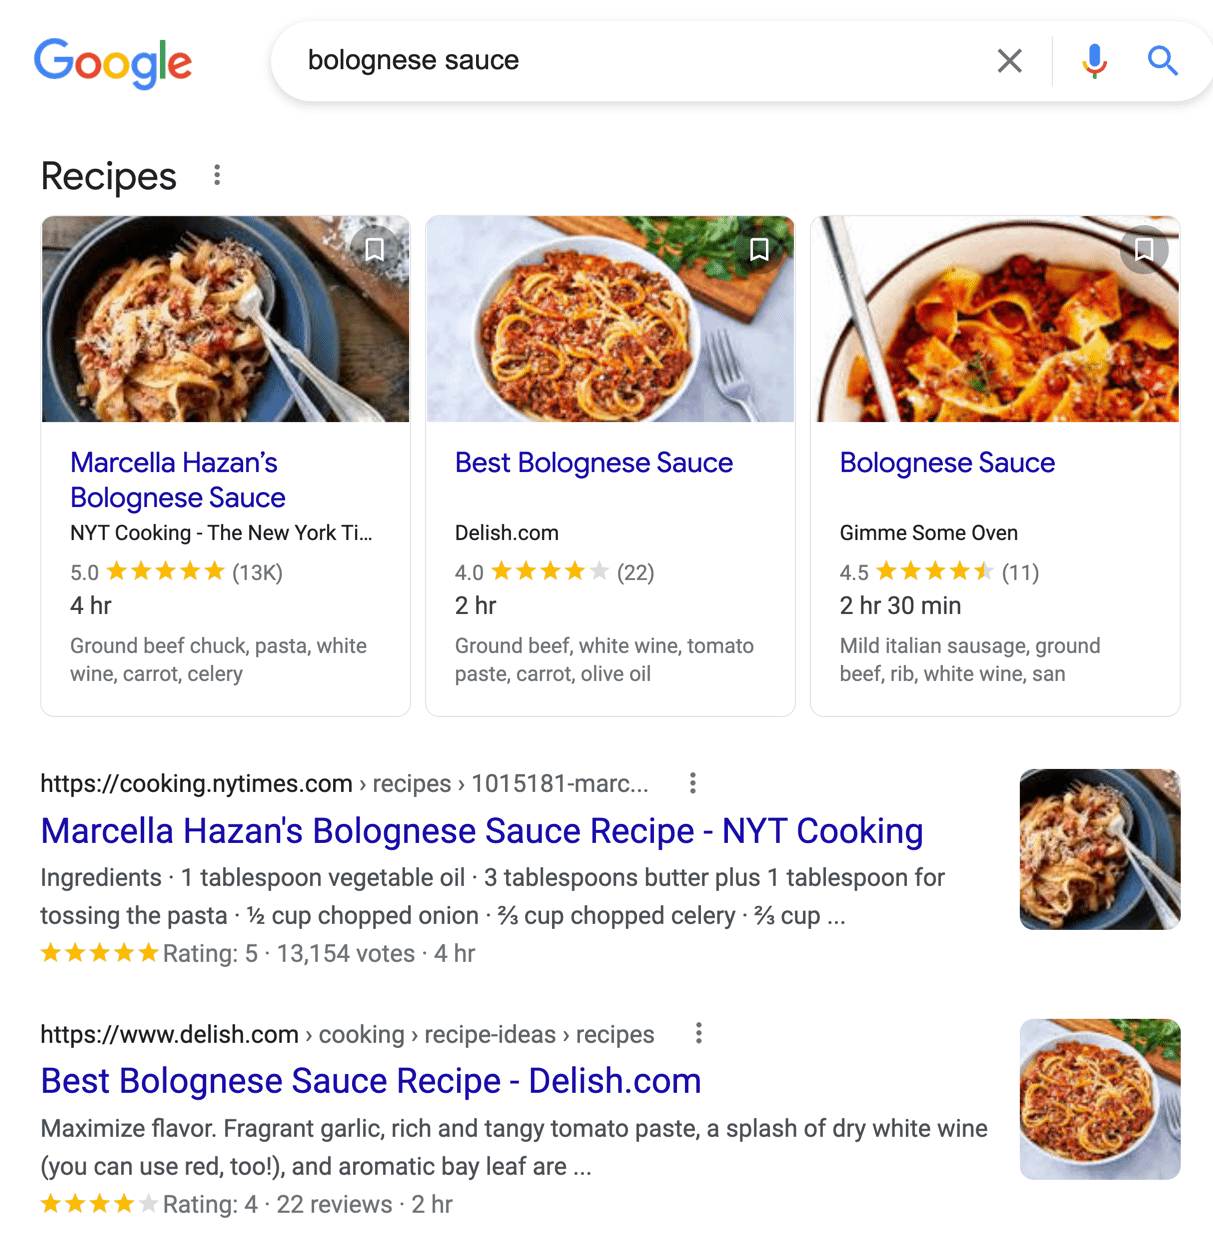 informational search intent with bolognese sauce